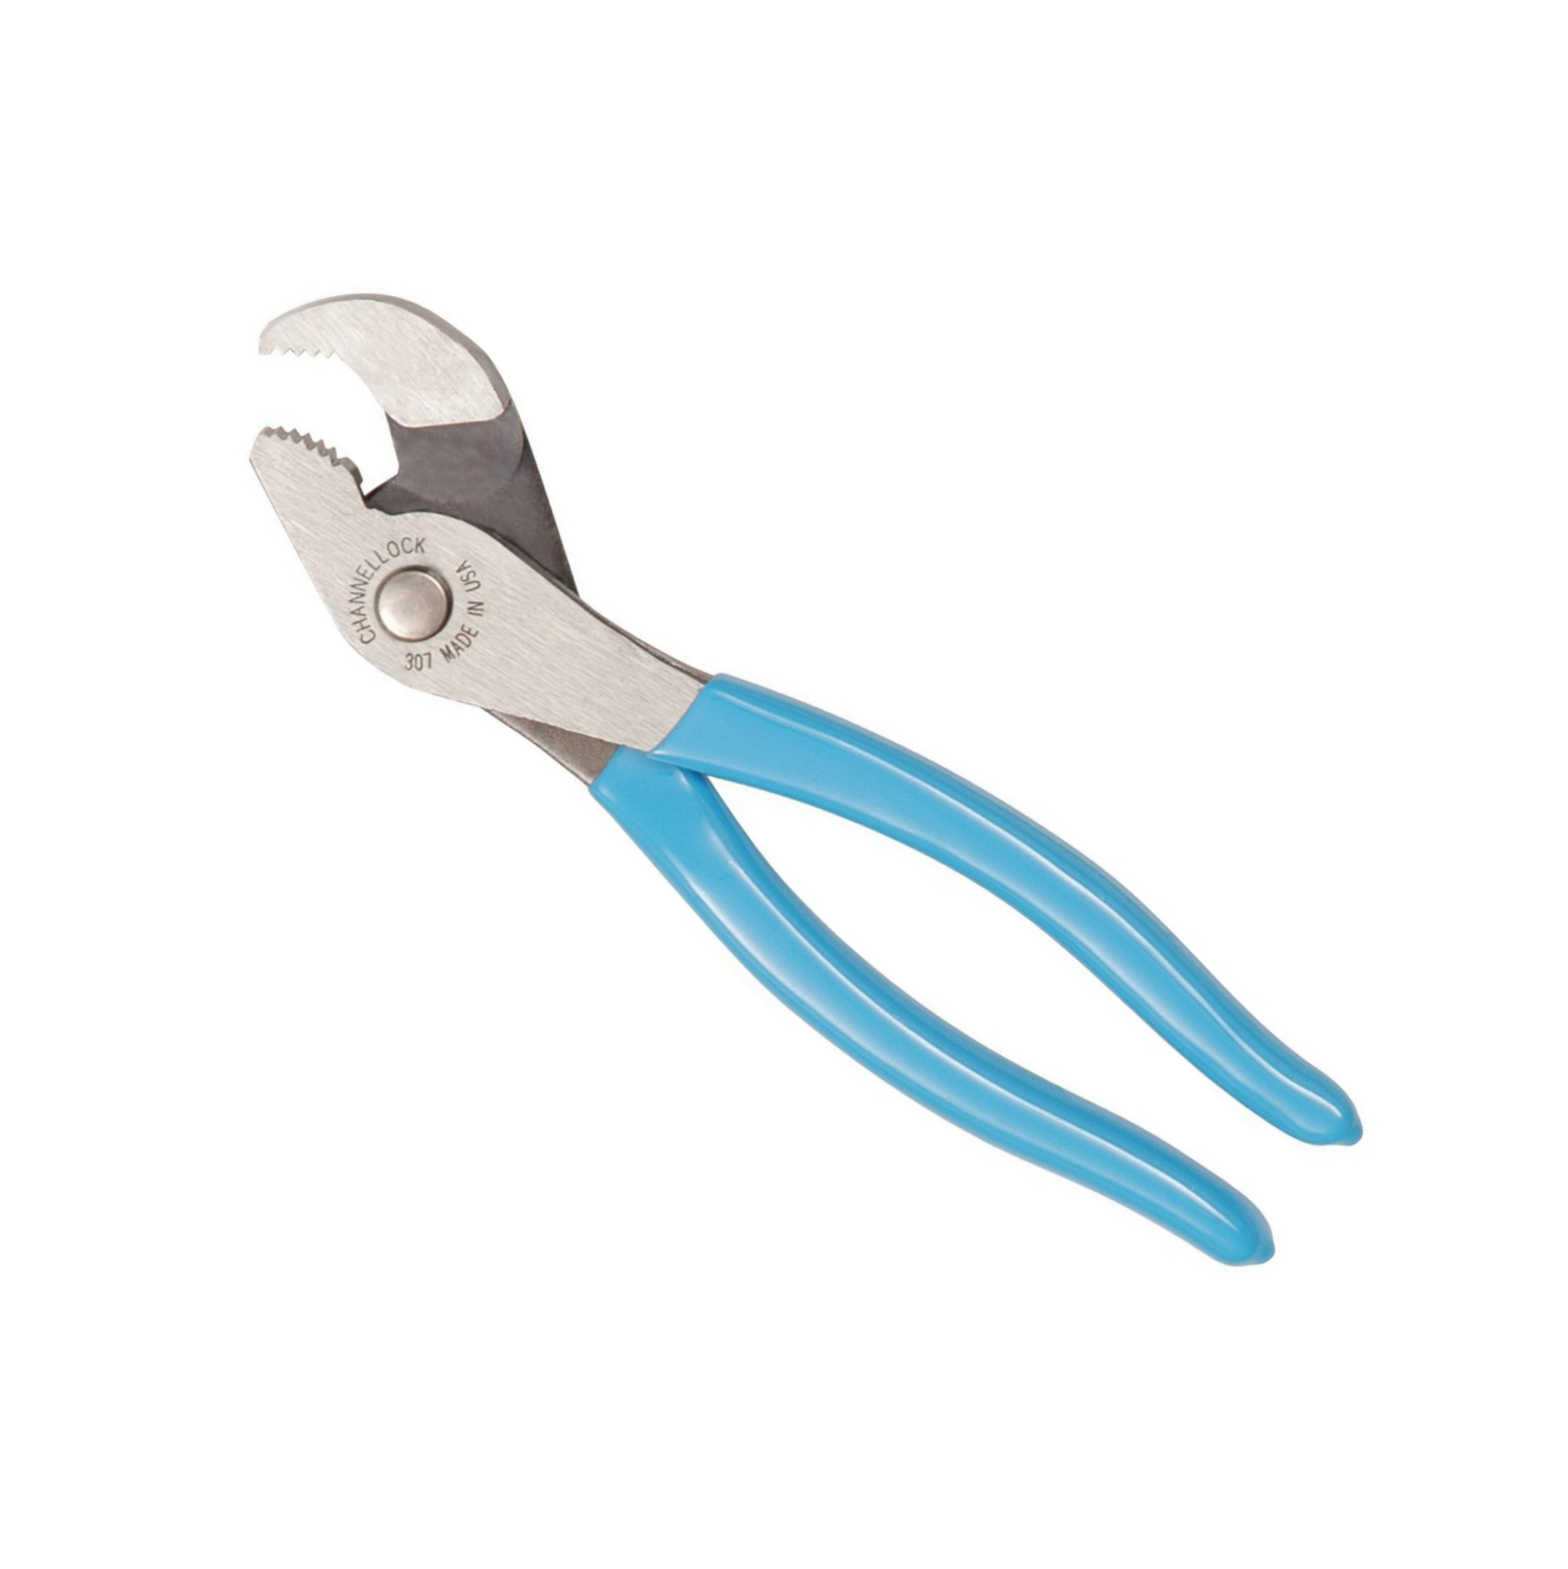 Channellock 307 7' Nutbuster Pliers, Parrot Nose, Nutbuster